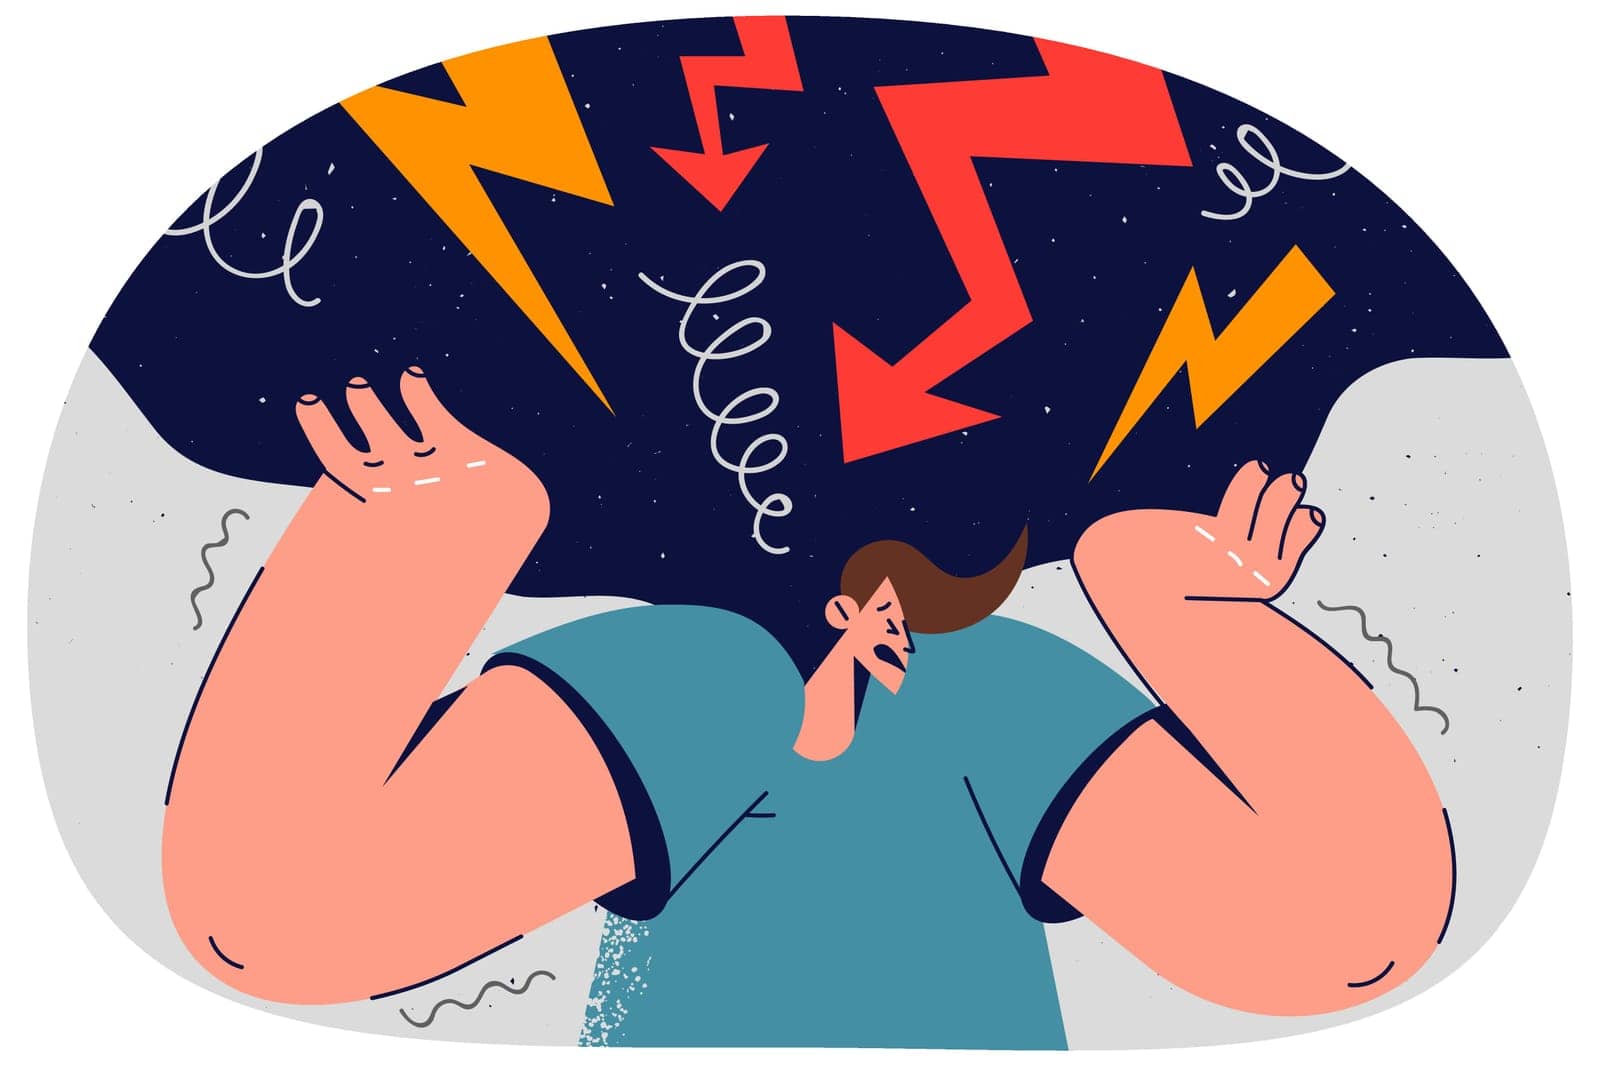 Stressed man overwhelmed with bad toxic thoughts. Unhappy distressed guy frustrated with burden, overthinking and worrying too much. Vector illustration.